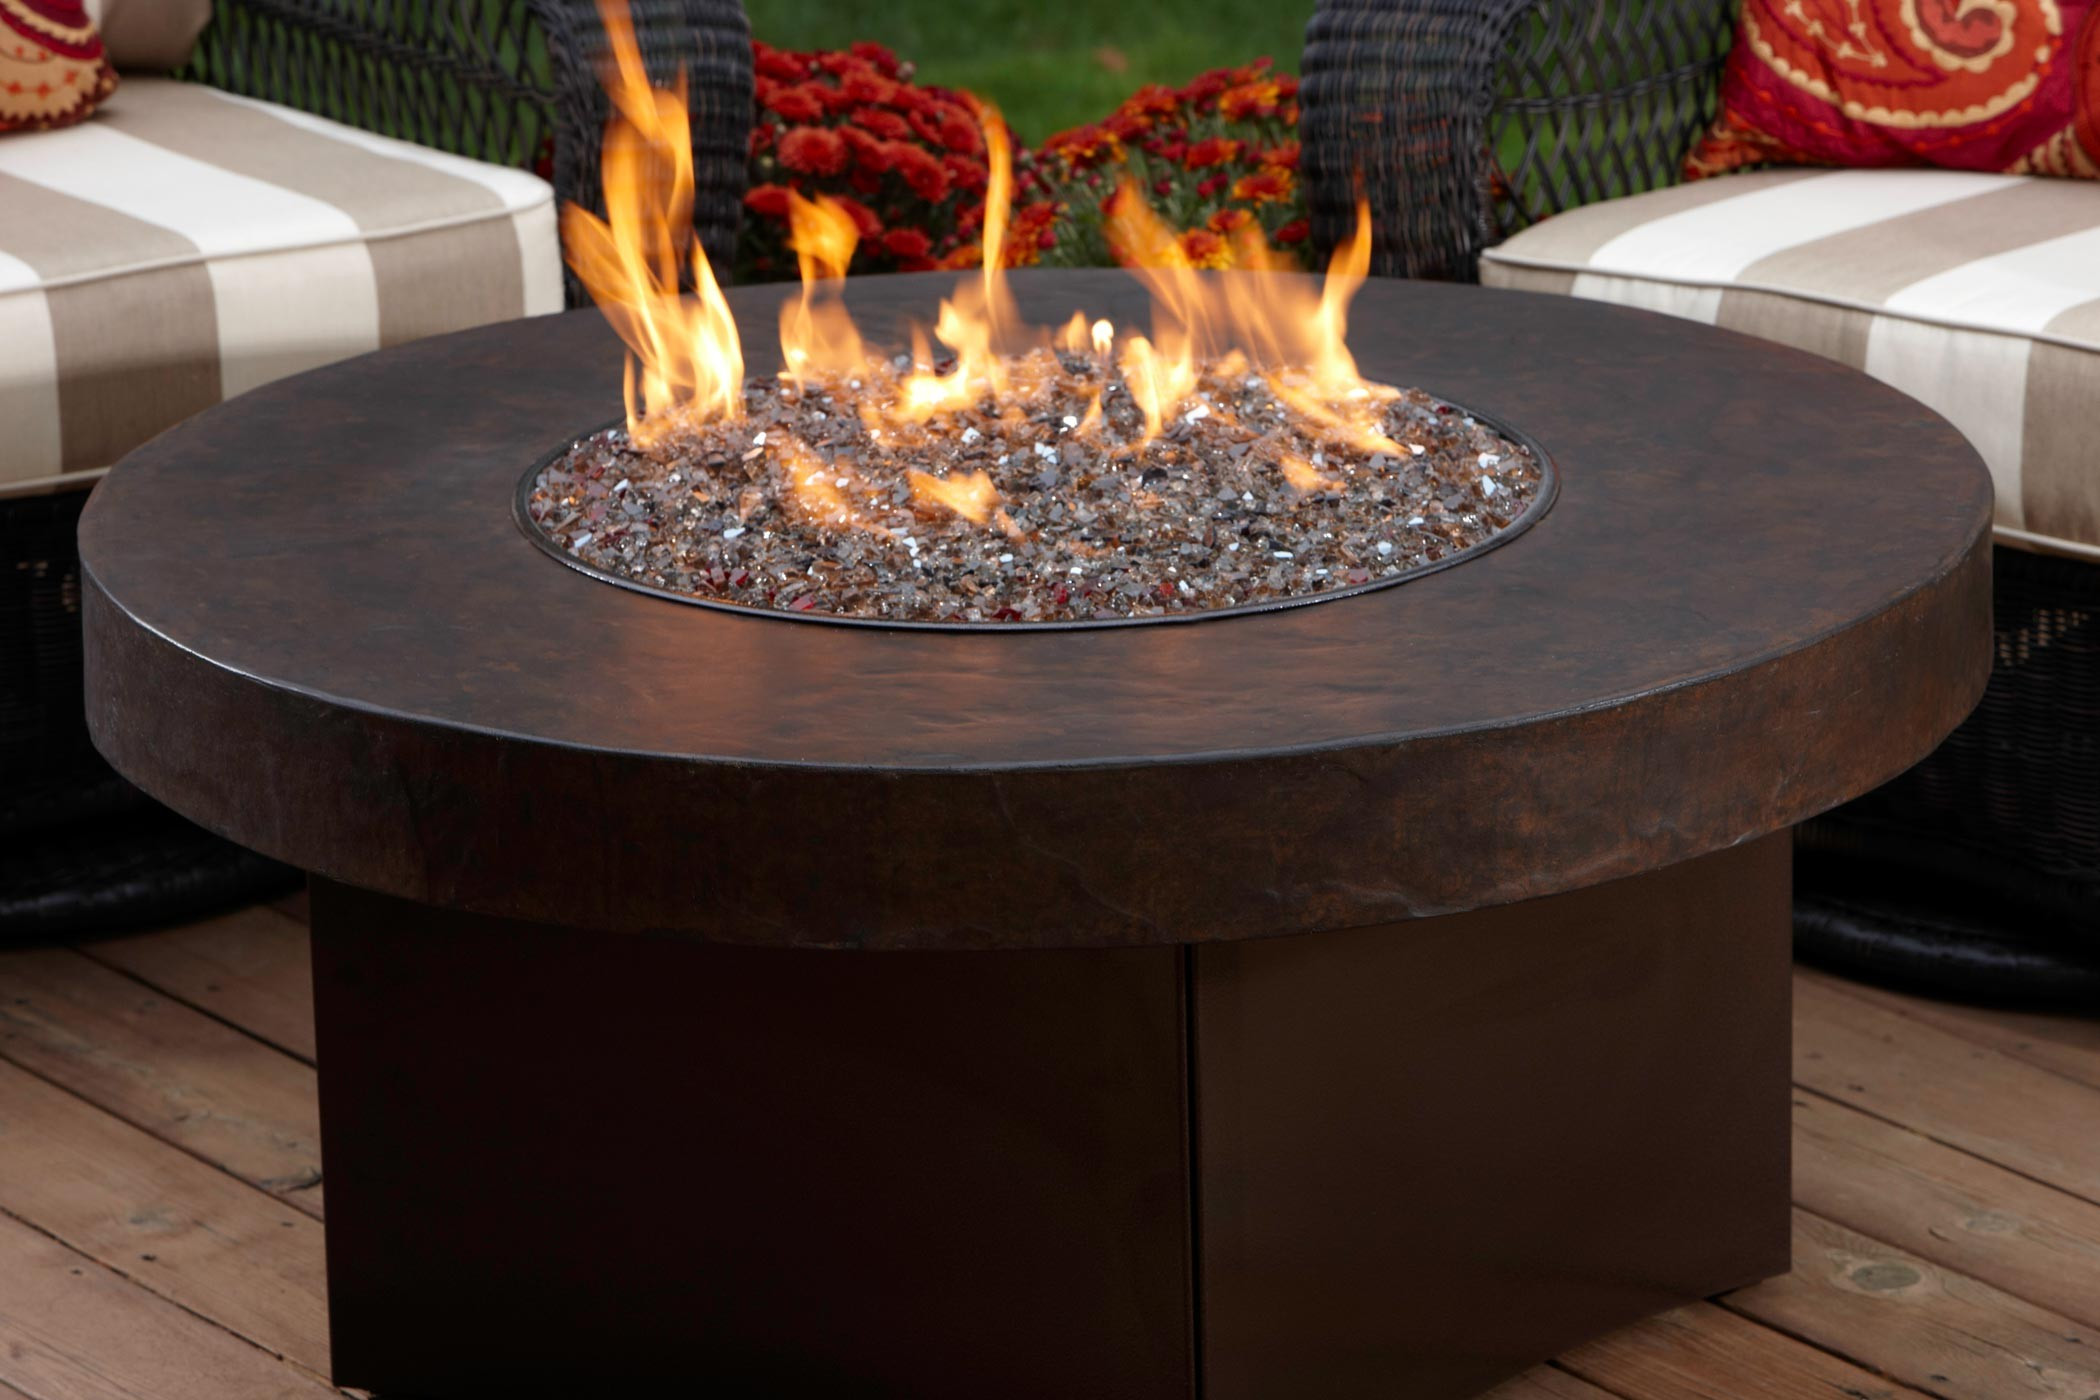 Patio Table With Fire Pit
 Fire Table Kit Ideas for Outdoor Patio